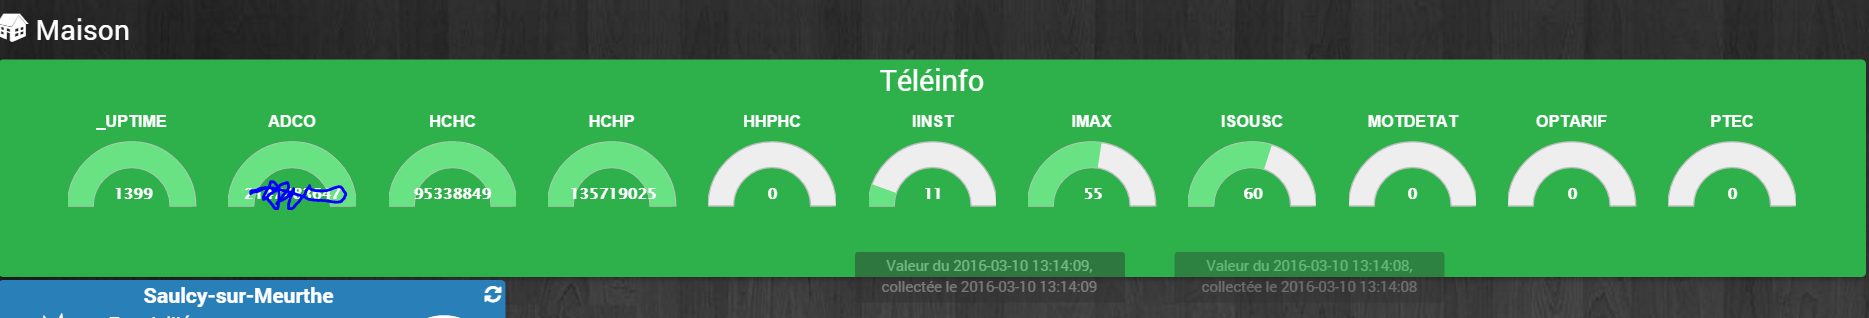 teleinfo.PNG